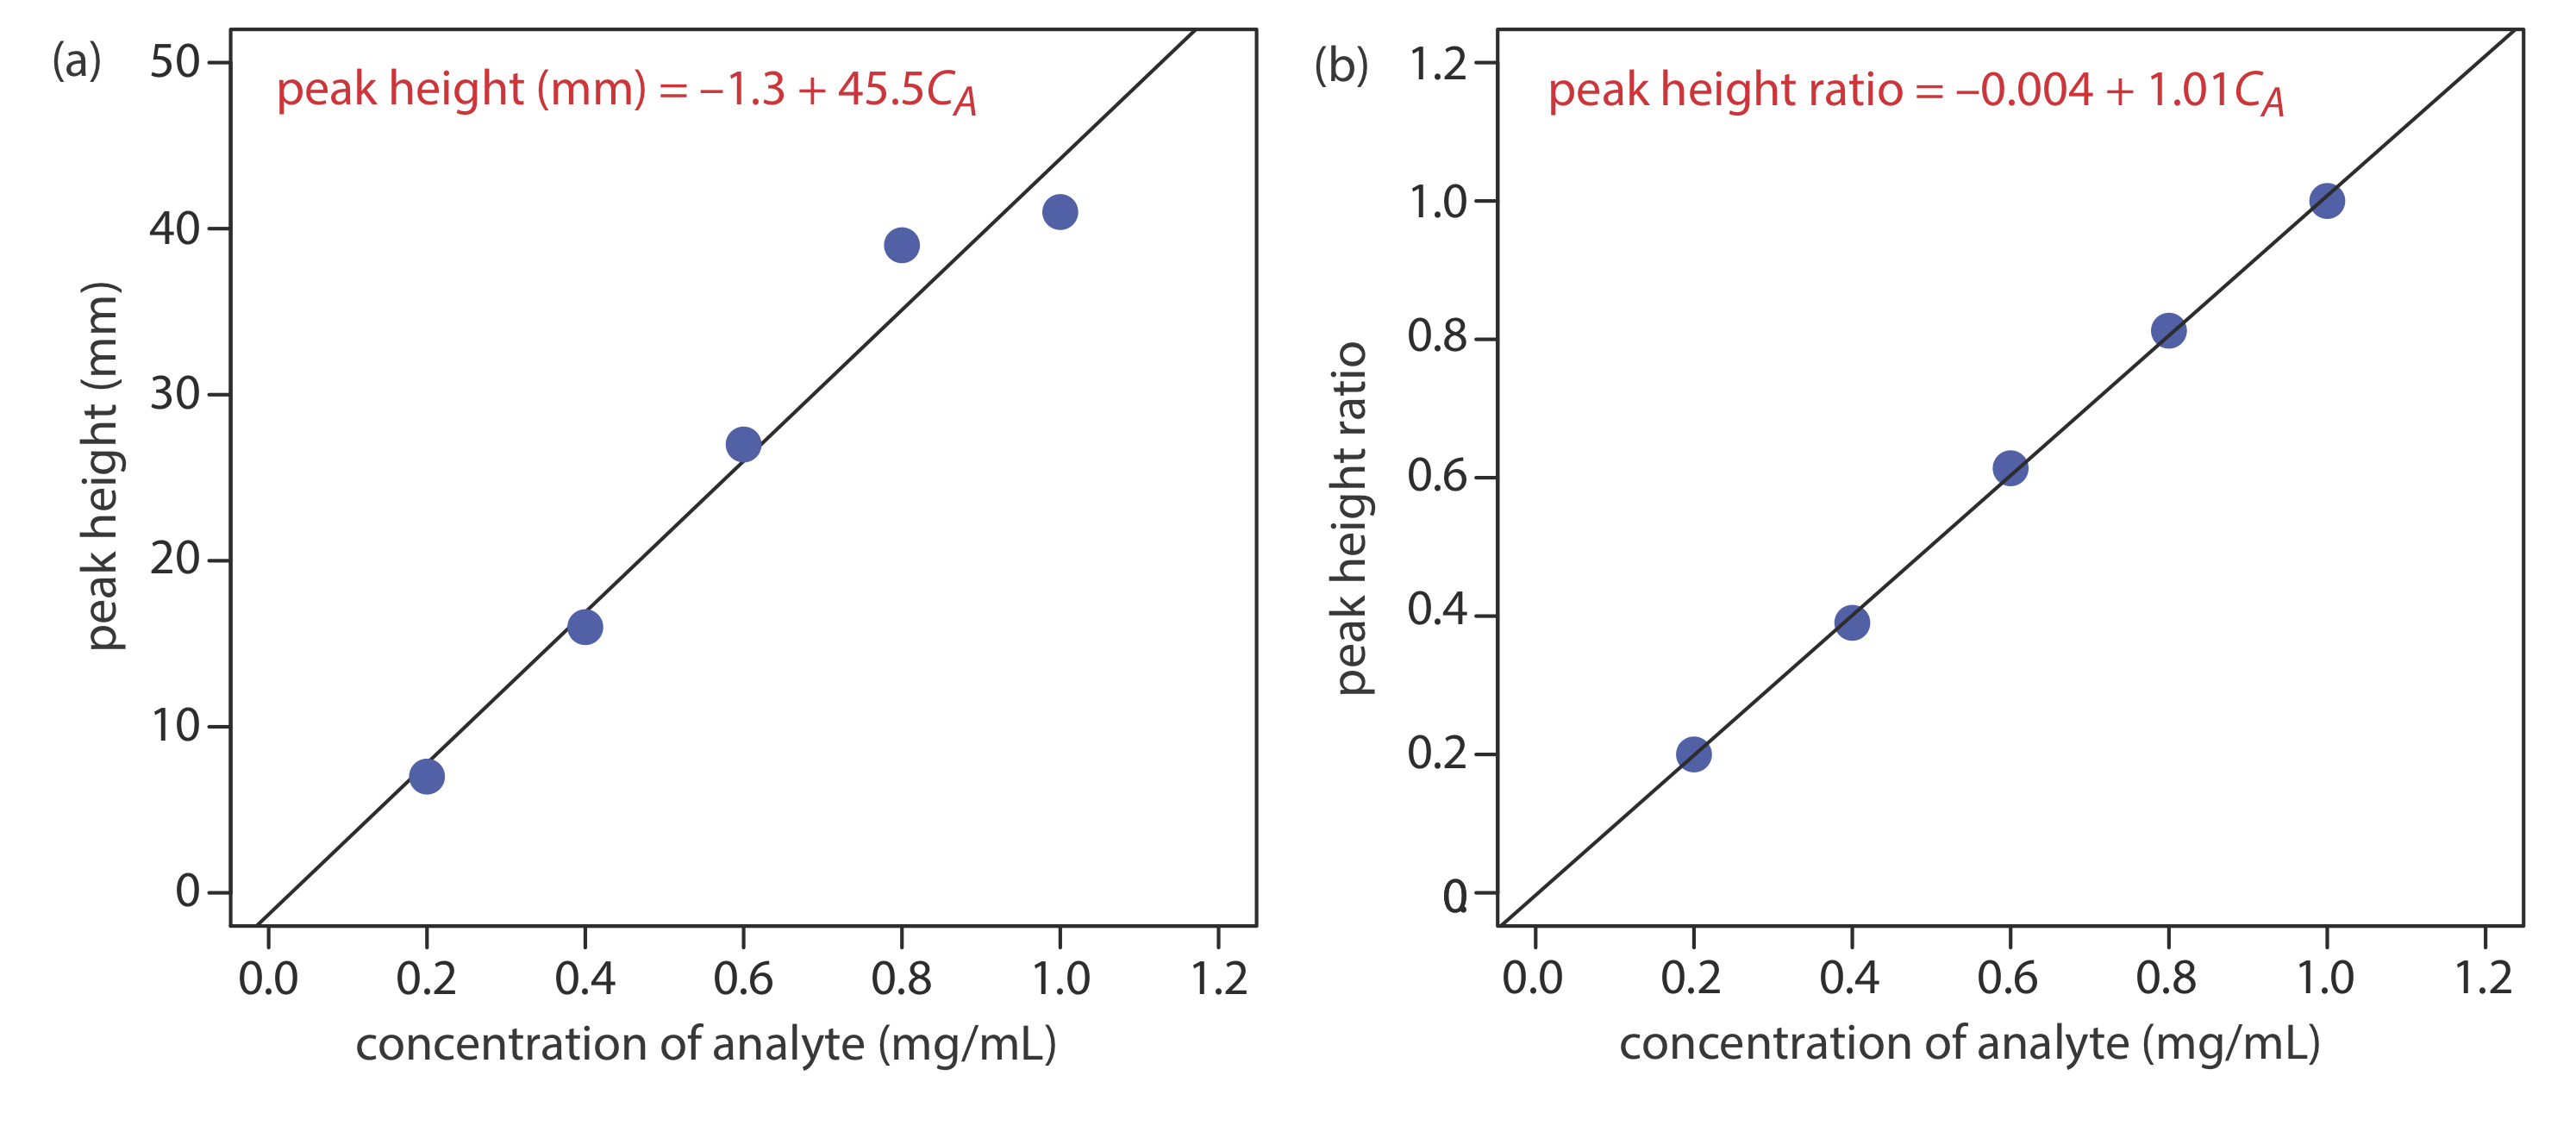 Graph "a" shows concentration of analyte (mg/mL) versus peak height (mm). Peak height (mm) = -1.3+45.5C(A). Graph "b" shows concentration of analyte (mg/mL) versus the peak height ratio. Peak height ratio = -0.004+1.01C(A).